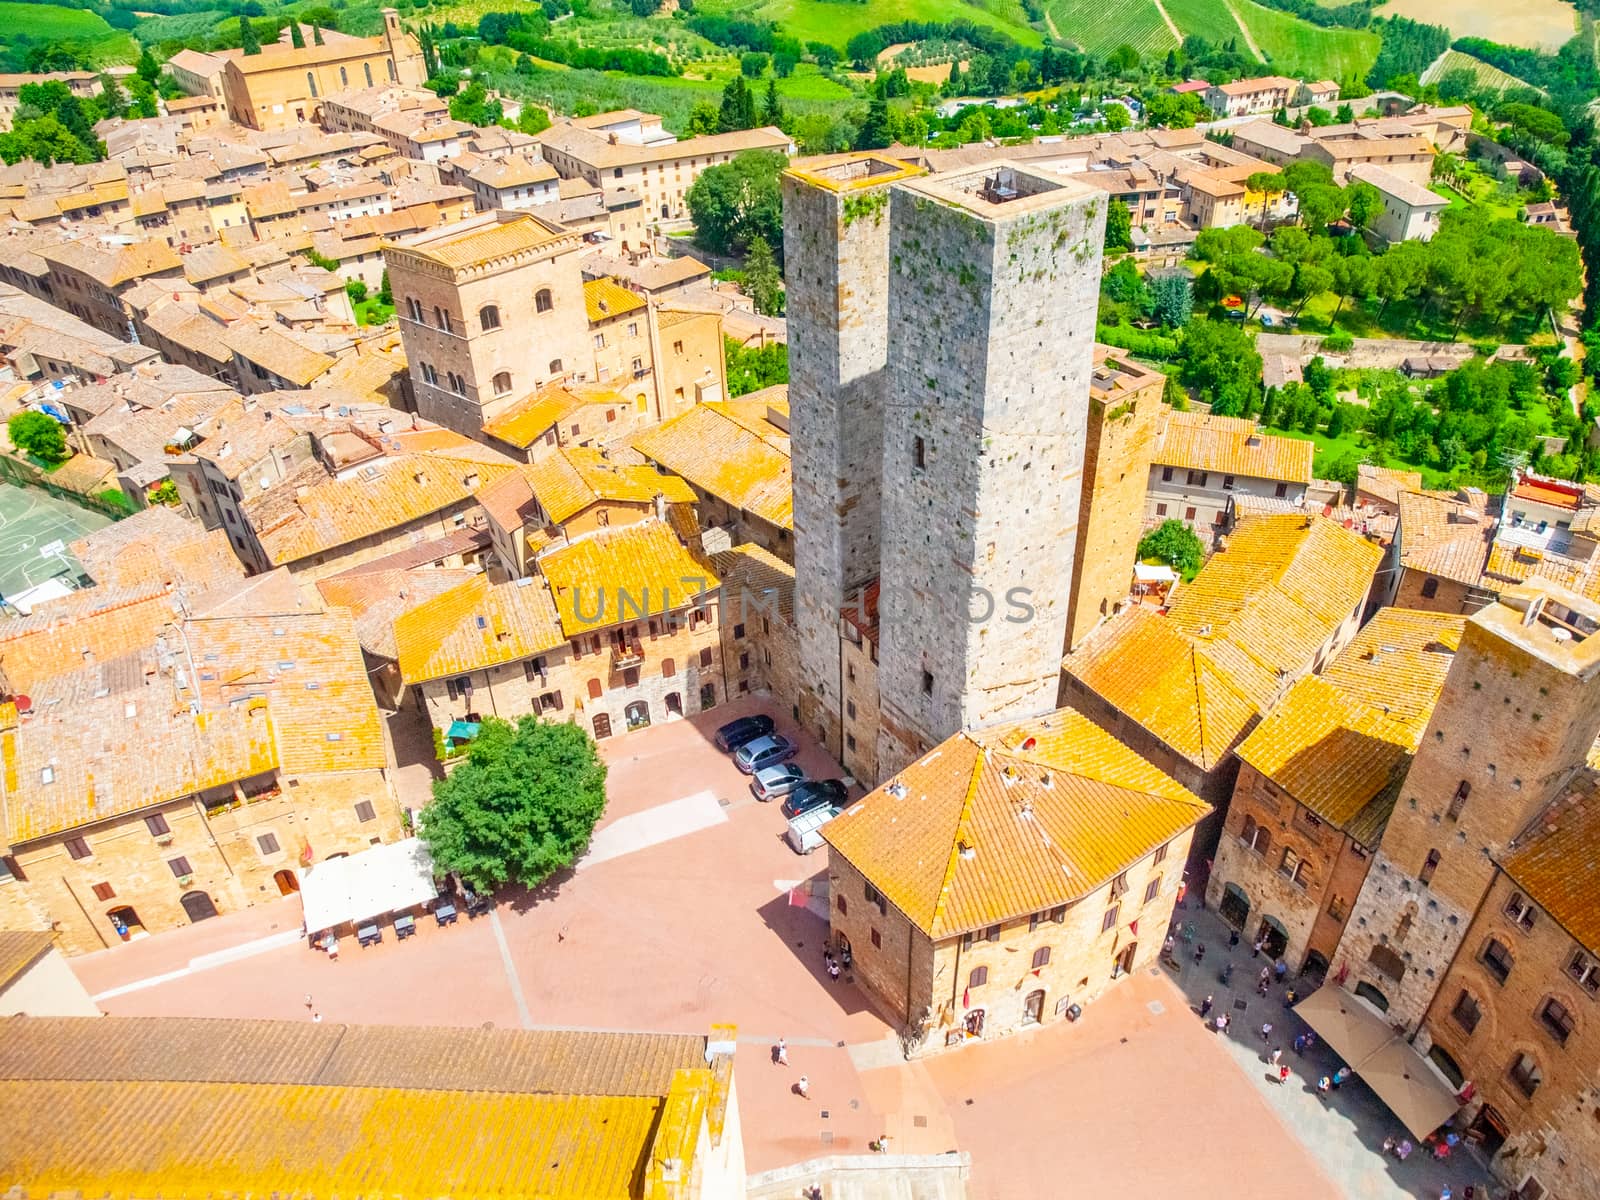 Aerial view of San Gimignano historical city centre with twin towers - Torri dei Salvucci, Tuscany, Italy by pyty